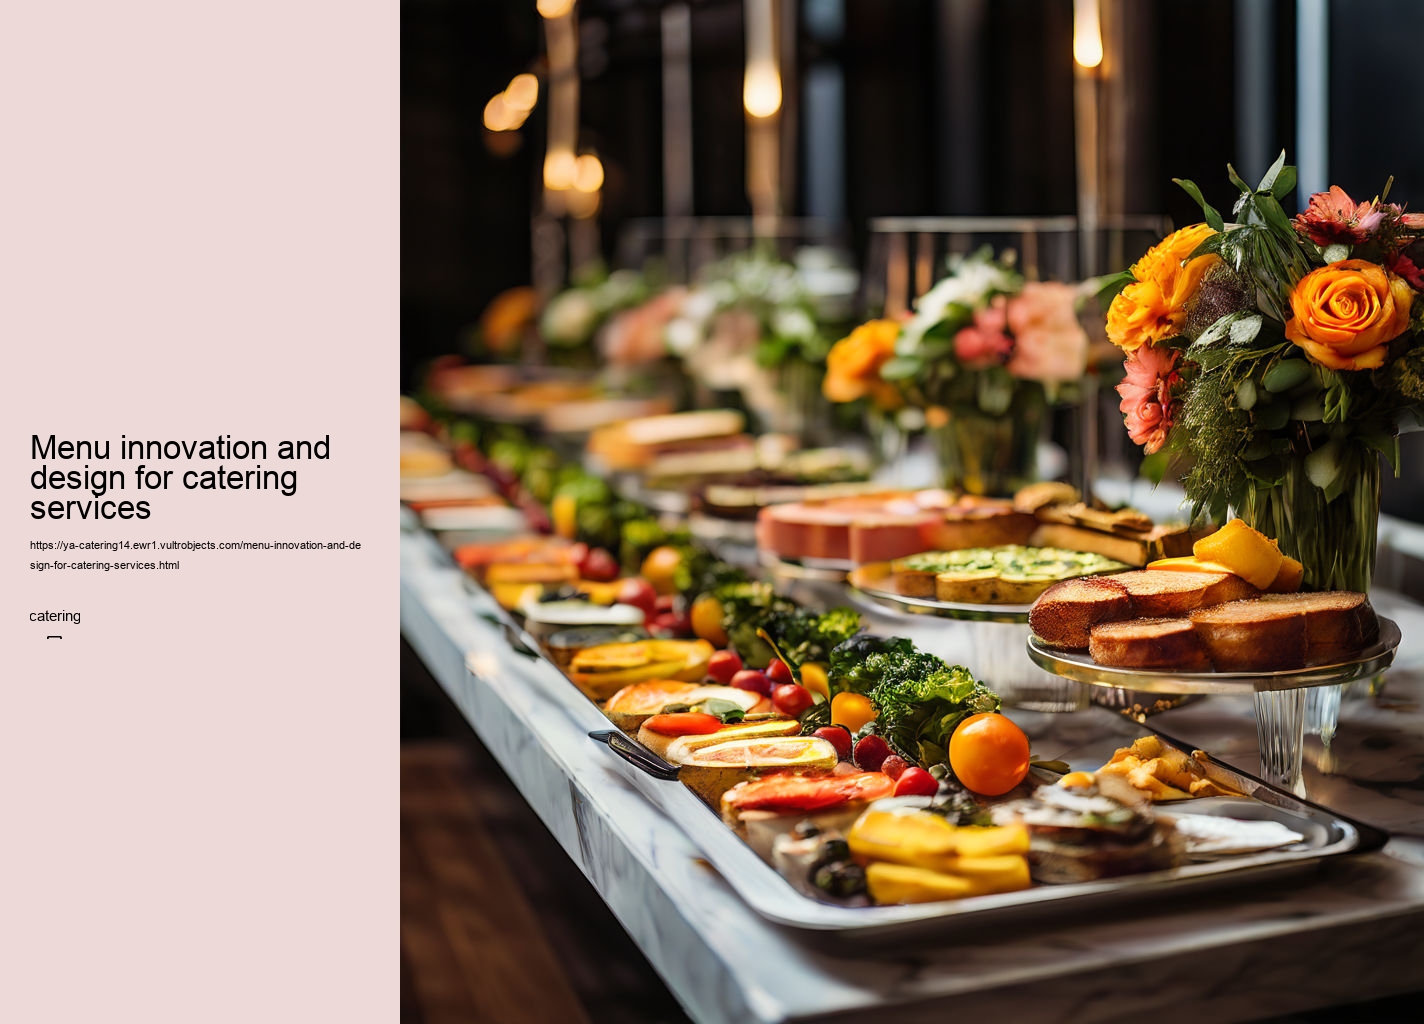 Menu innovation and design for catering services